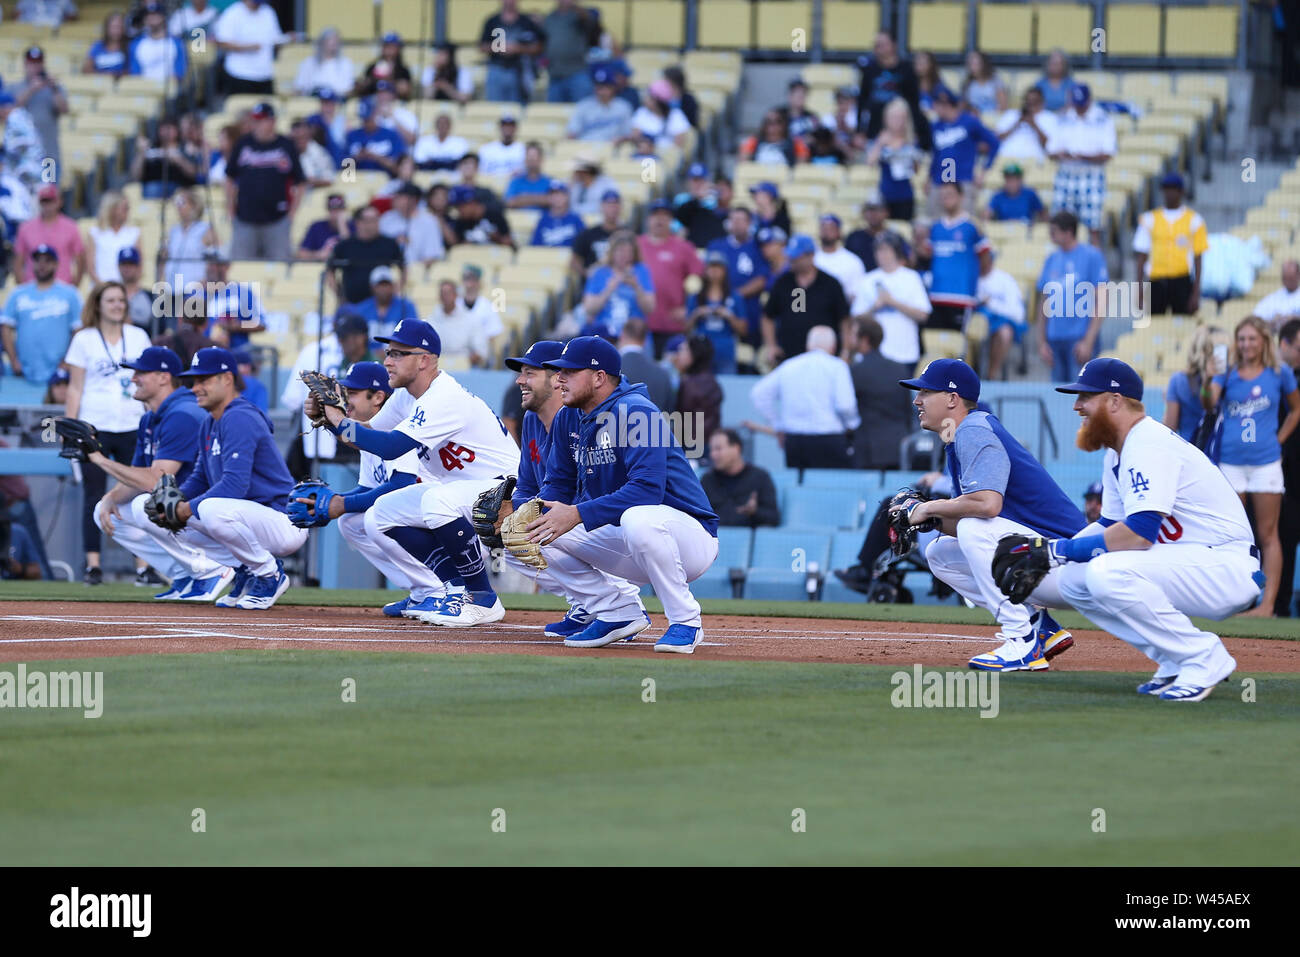 Los Angeles, CA, USA. 19th July, 2019. Eight Dodger players prepare for eight first pitches during the game between the Miami Marlins and the Los Angeles Dodgers at Dodger Stadium in Los Angeles, CA. (Photo by Peter Joneleit) Credit: csm/Alamy Live News Stock Photo